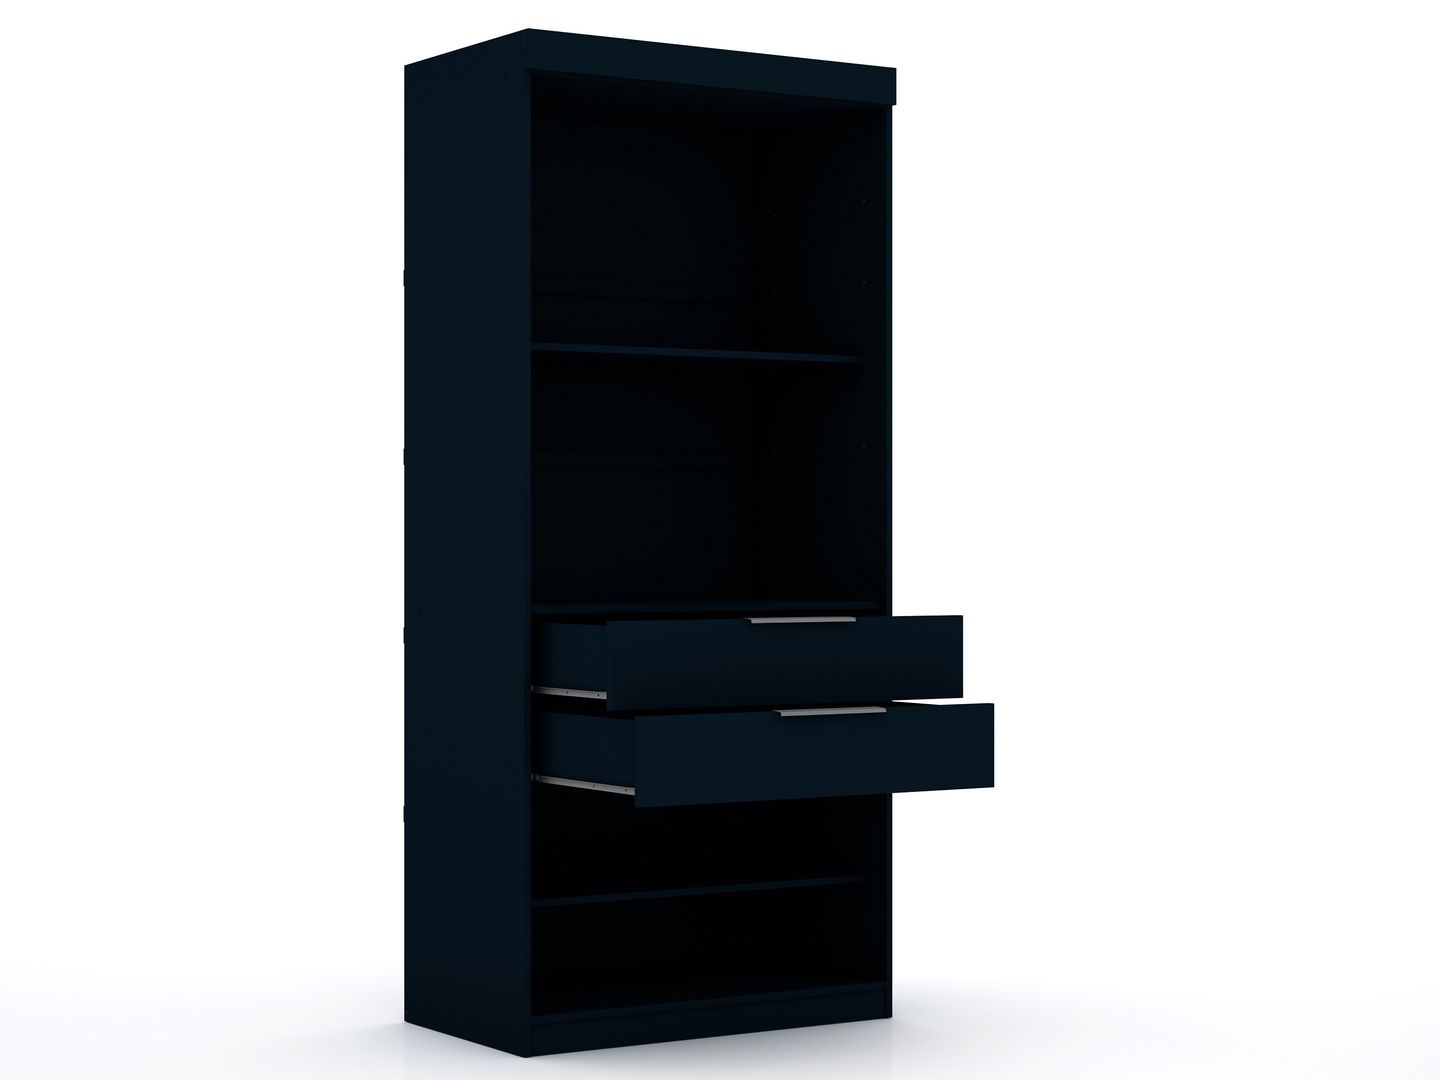 Manhattan Comfort Mulberry 2.0 Modern 3 Sectional Wardrobe Closet with 6 Drawers - Set of 3 in Tatiana Midnight Blue